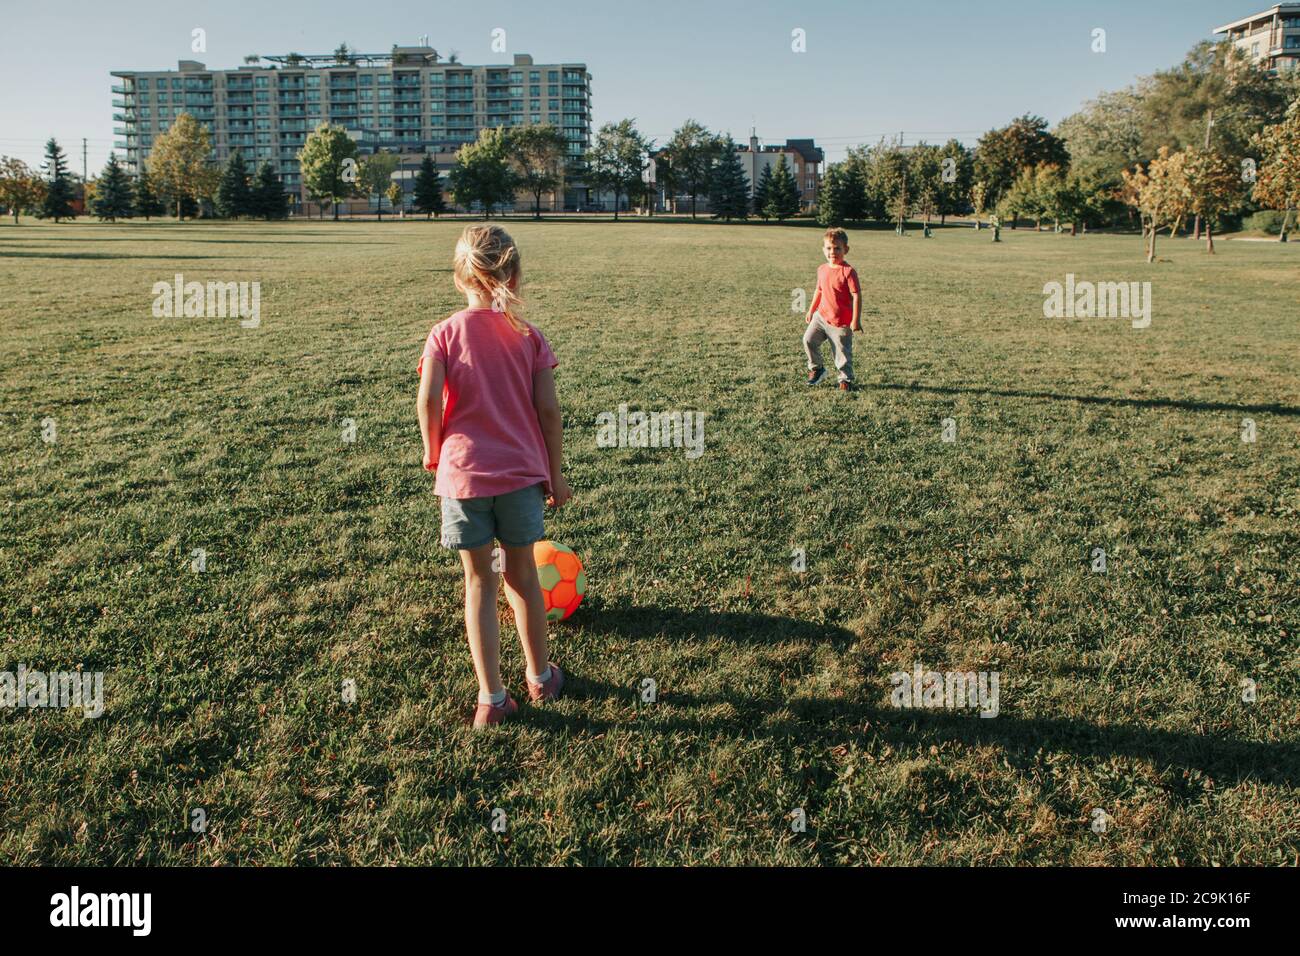 Little preschool girl and boy friends playing soccer football on playground grass field outside. Happy authentic candid childhood lifestyle. Stock Photo